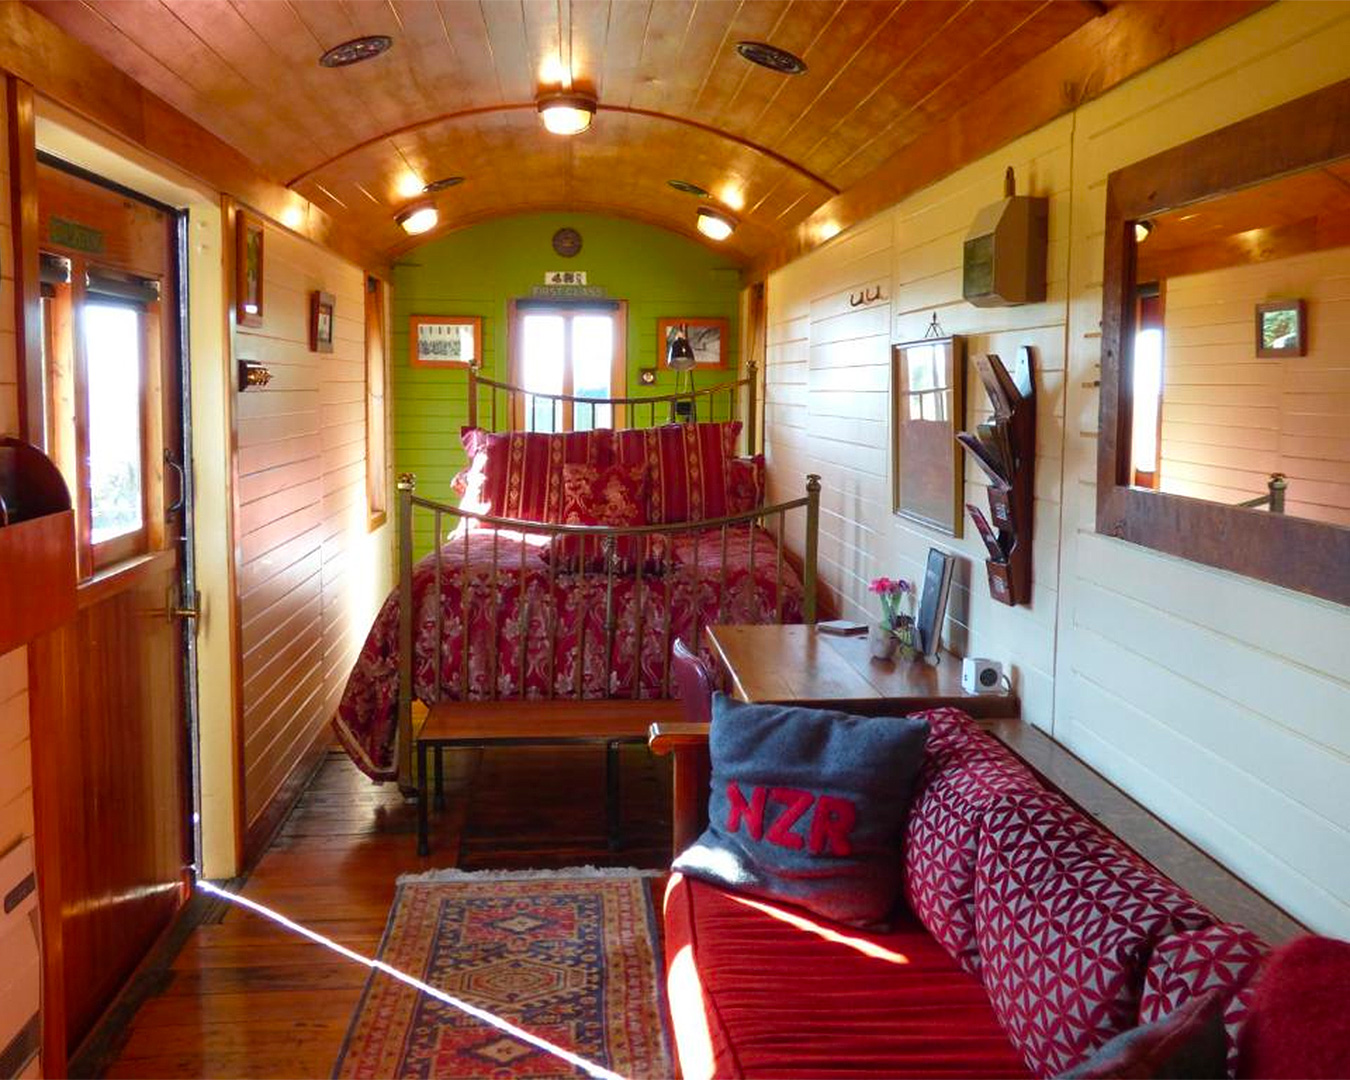 A cosy bed with red patterned bedspread awaits within a restored railway carriage. 